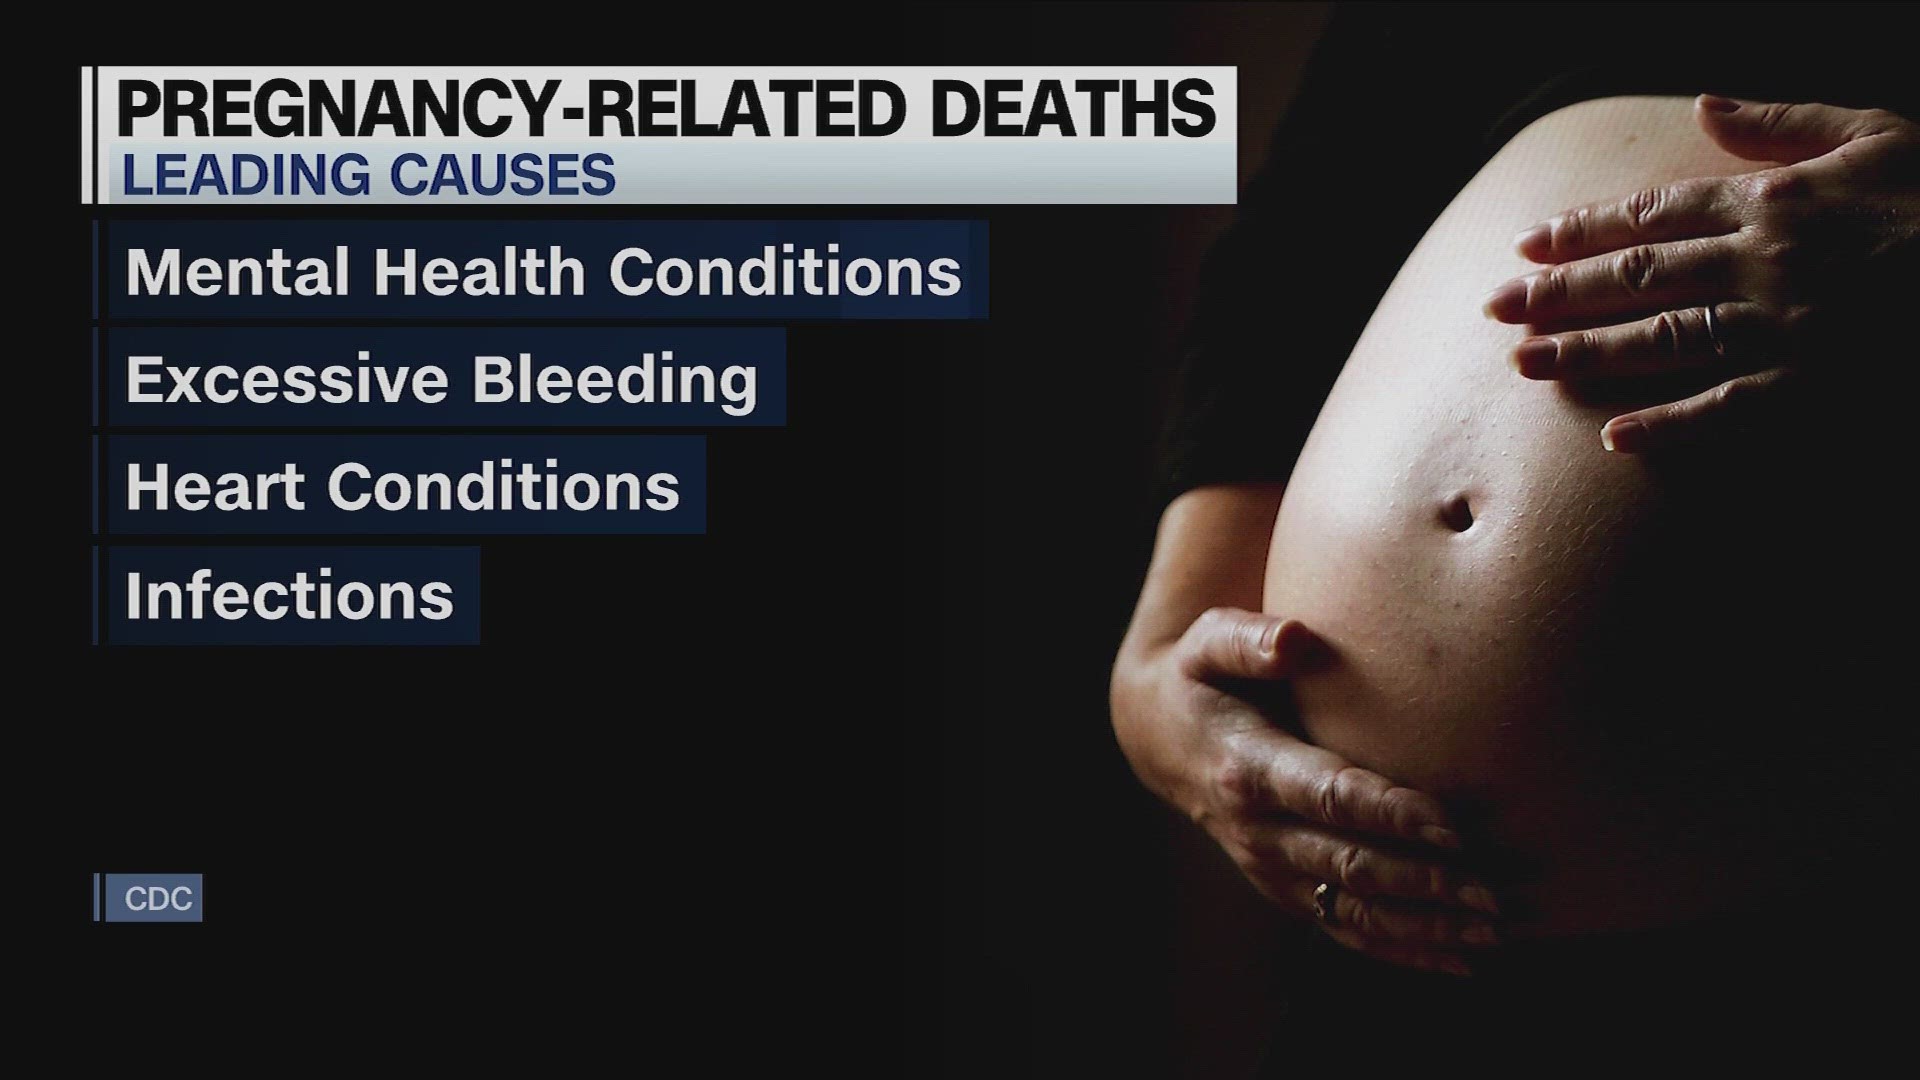 The Centers for Disease Control and Prevention said its latest data shows Black mothers suffer higher maternal mortality rates than white and Hispanic mothers.